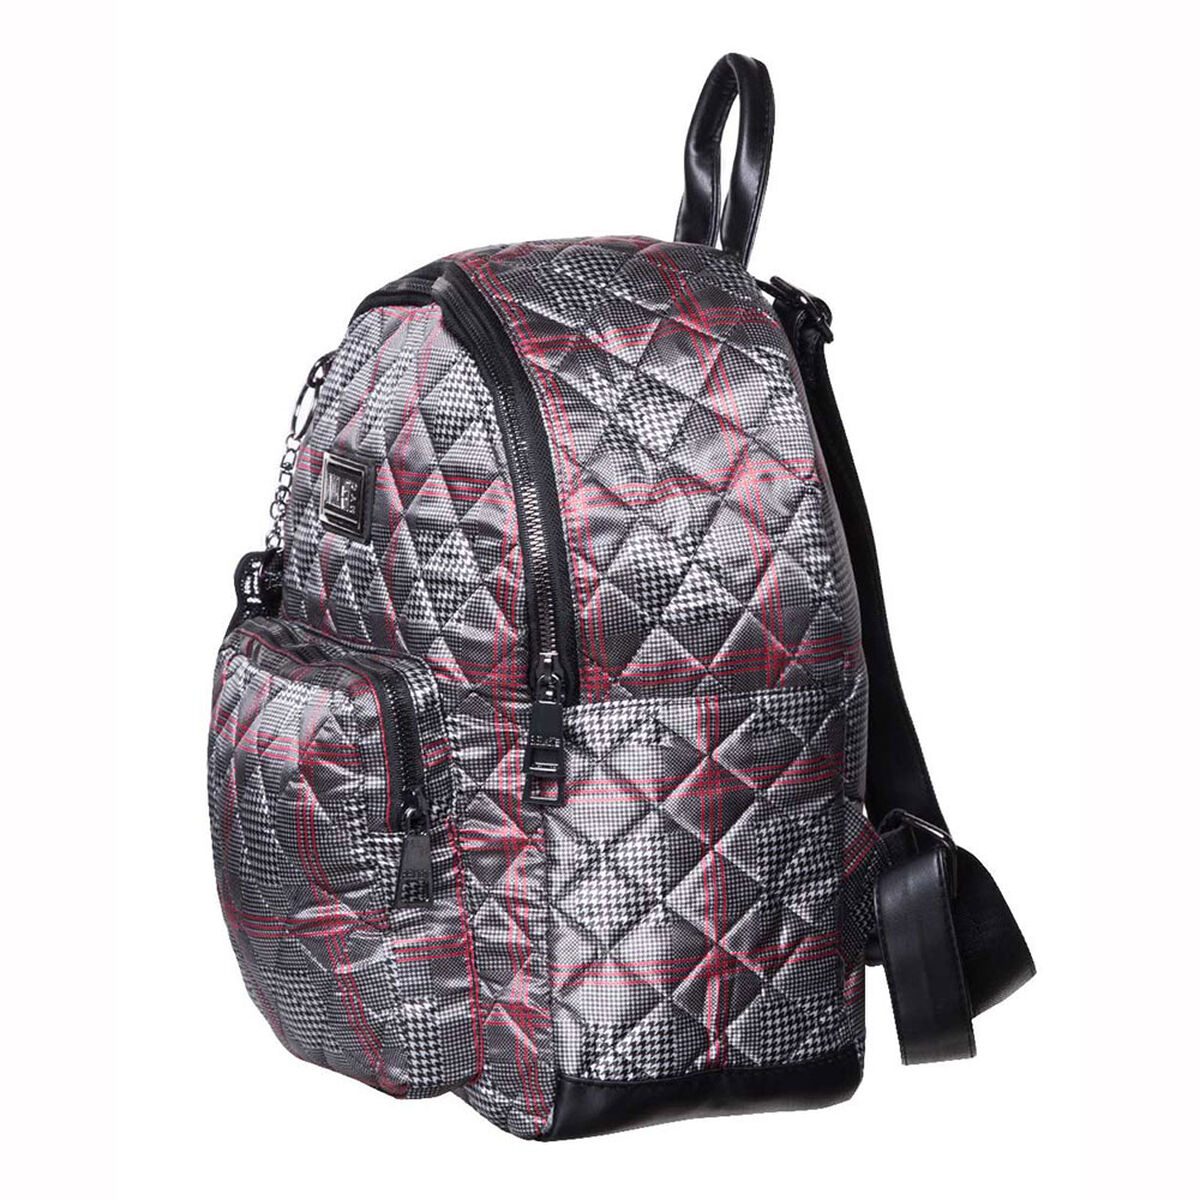 Mochila Quilted Pdg Oxford